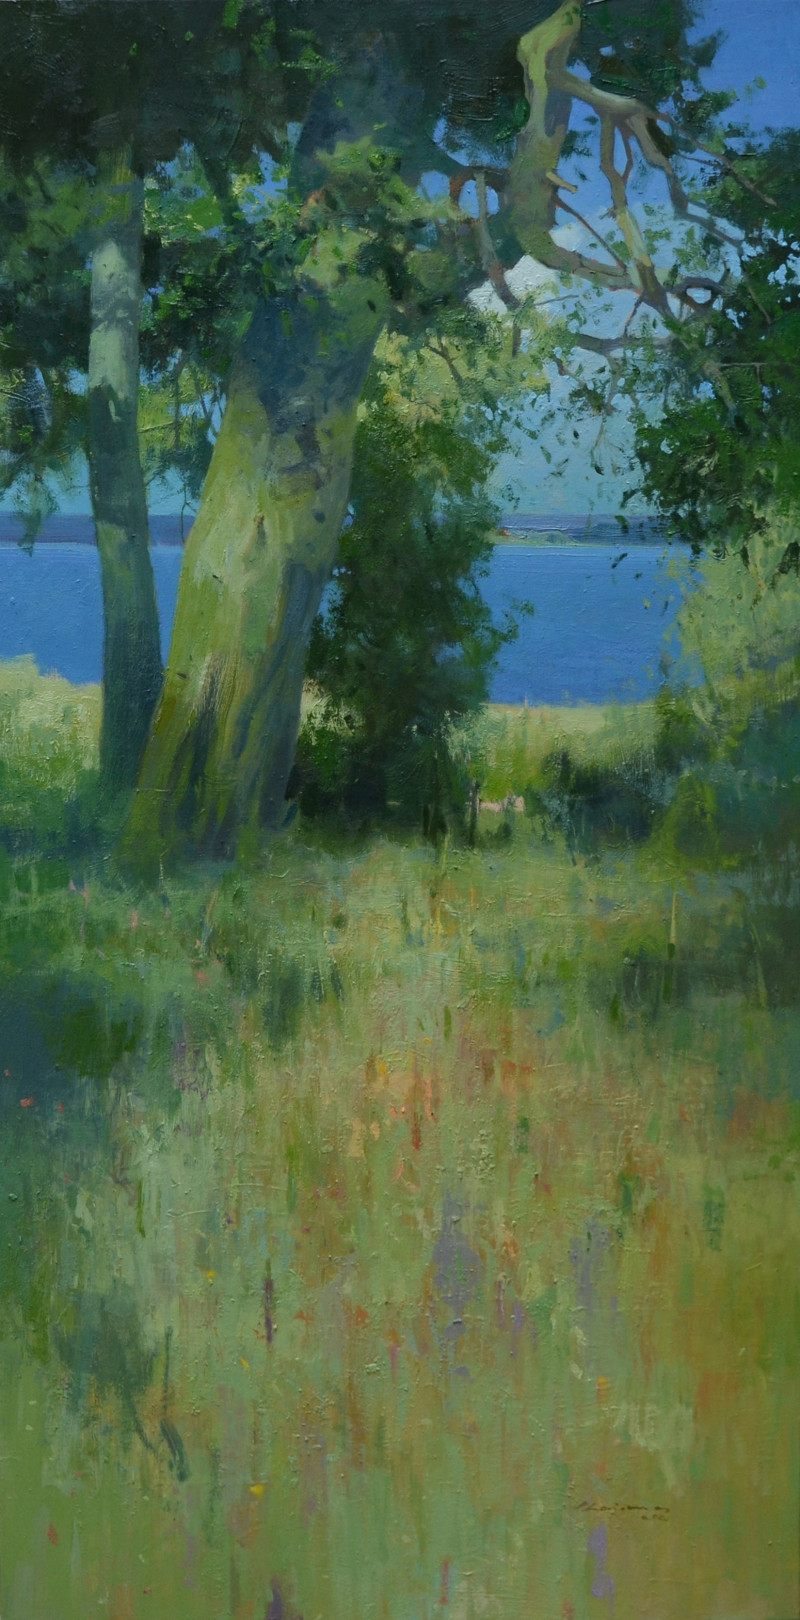 By the Lake original painting by Vytautas Laisonas. Landscapes